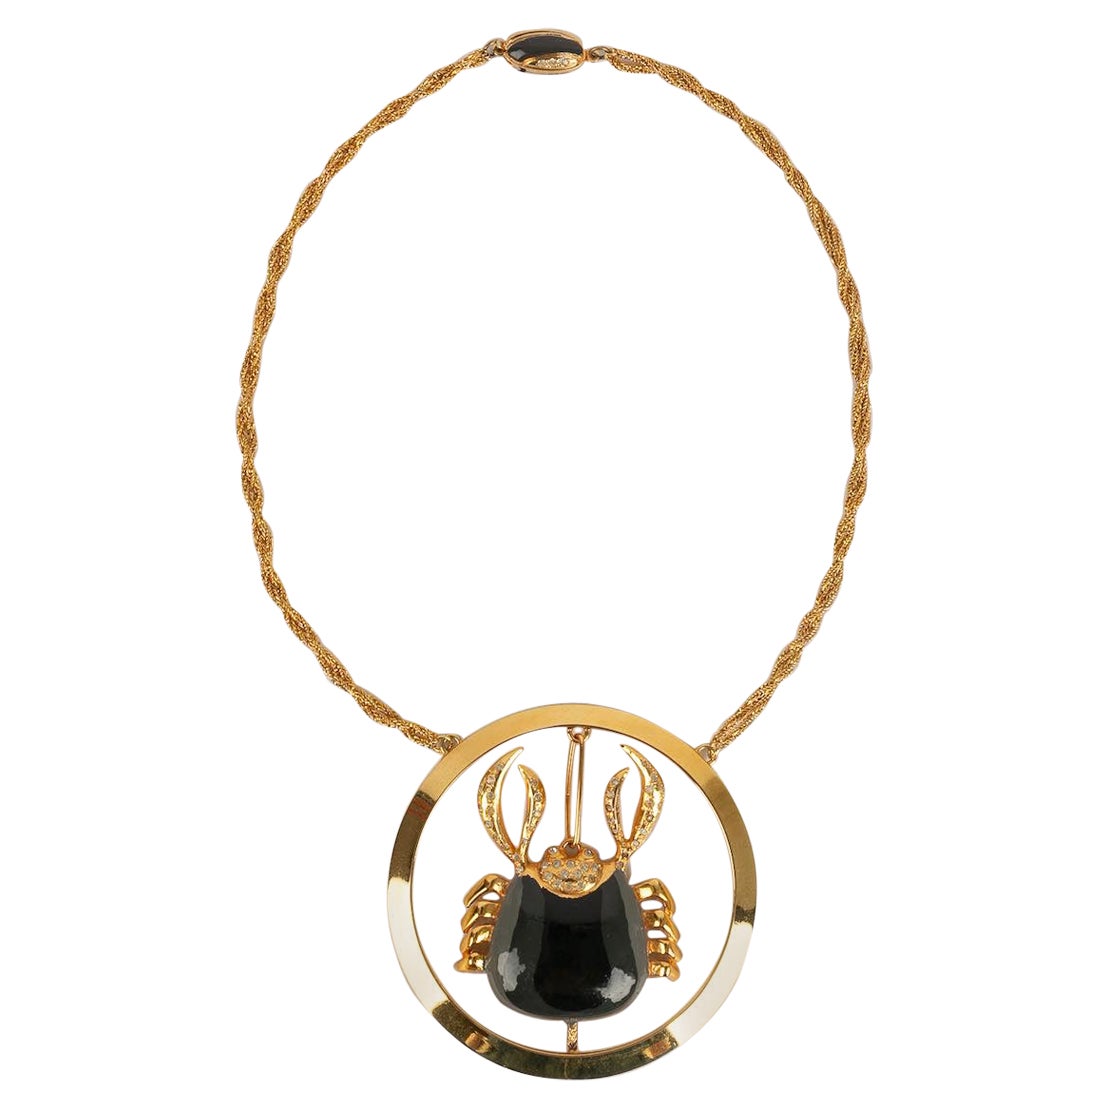 Pierre Cardin Crab Necklace in Golden Metal For Sale